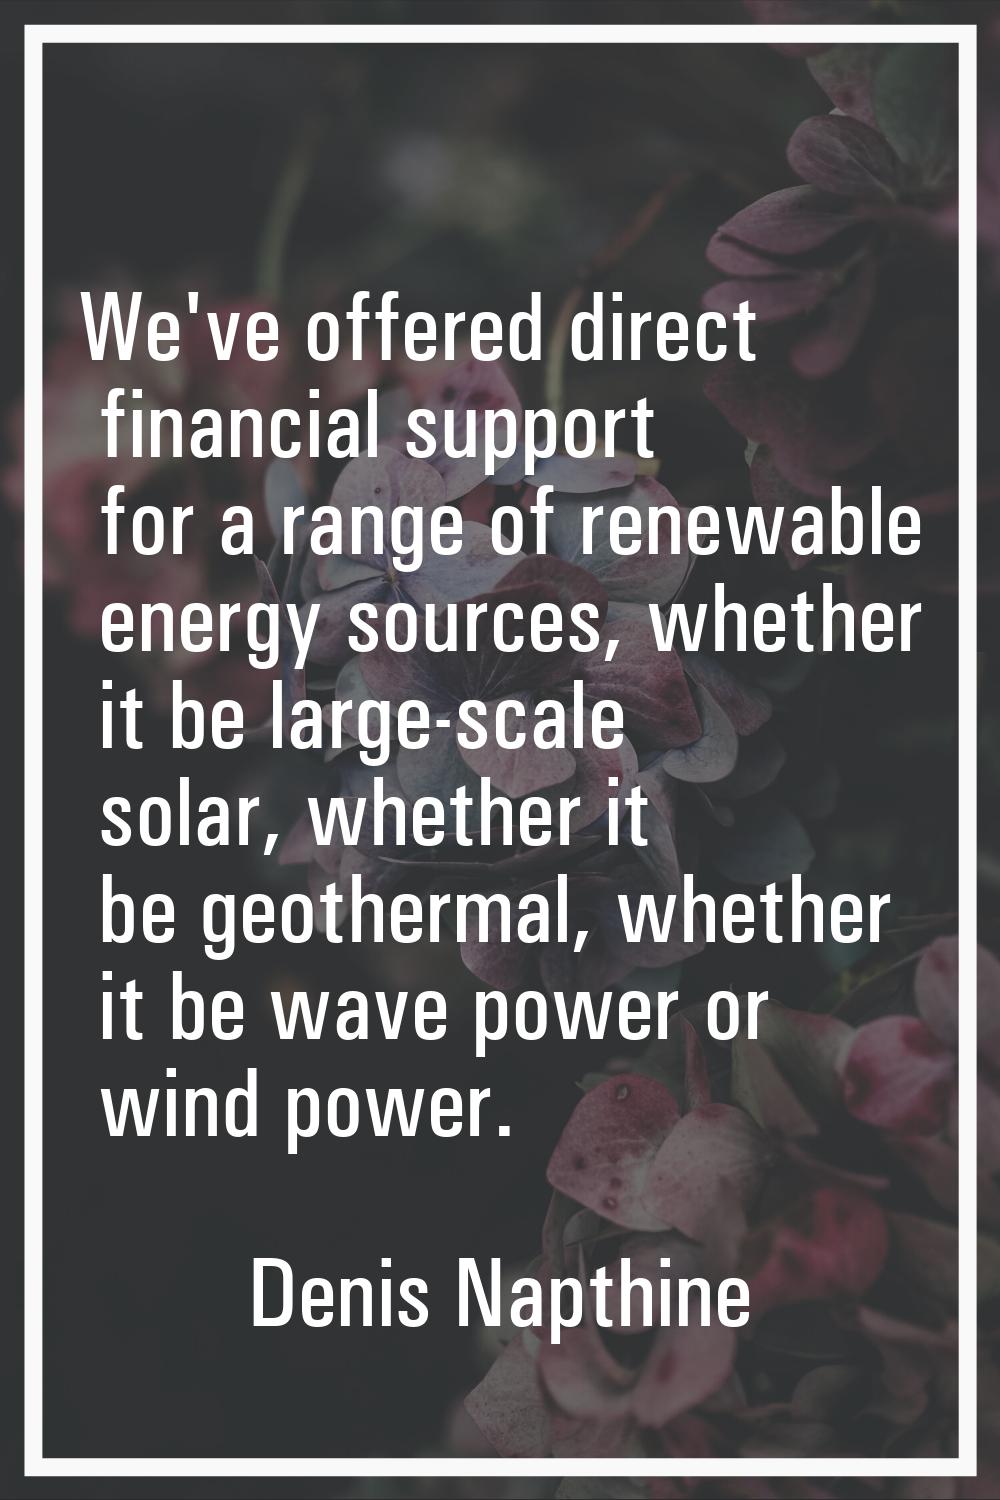 We've offered direct financial support for a range of renewable energy sources, whether it be large